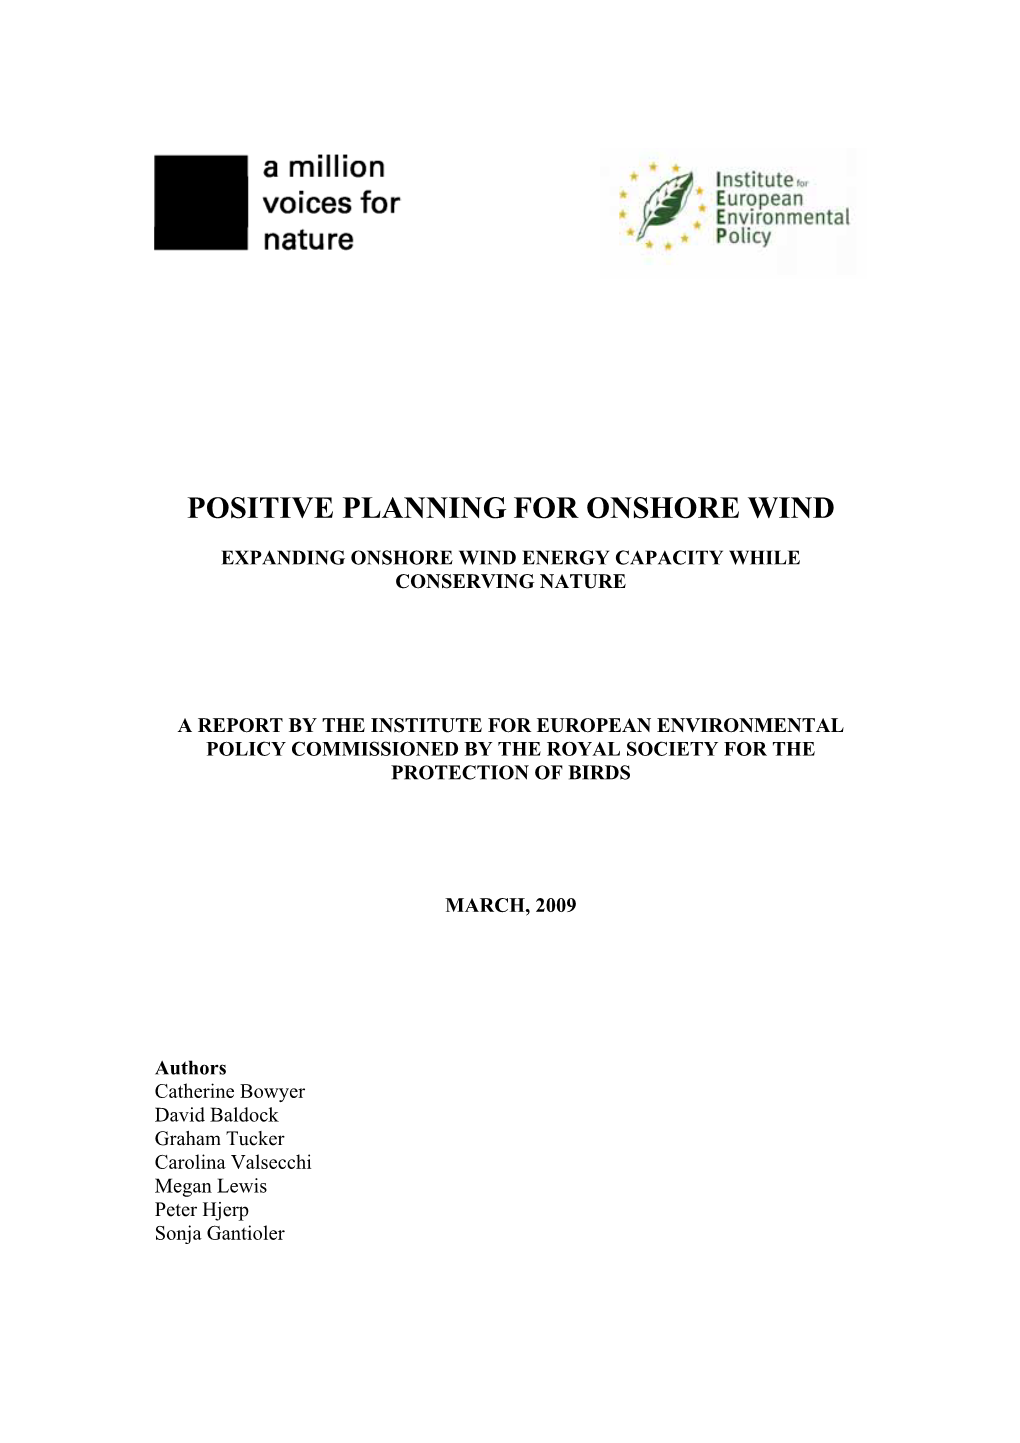 Positive Planning for Onshore Wind